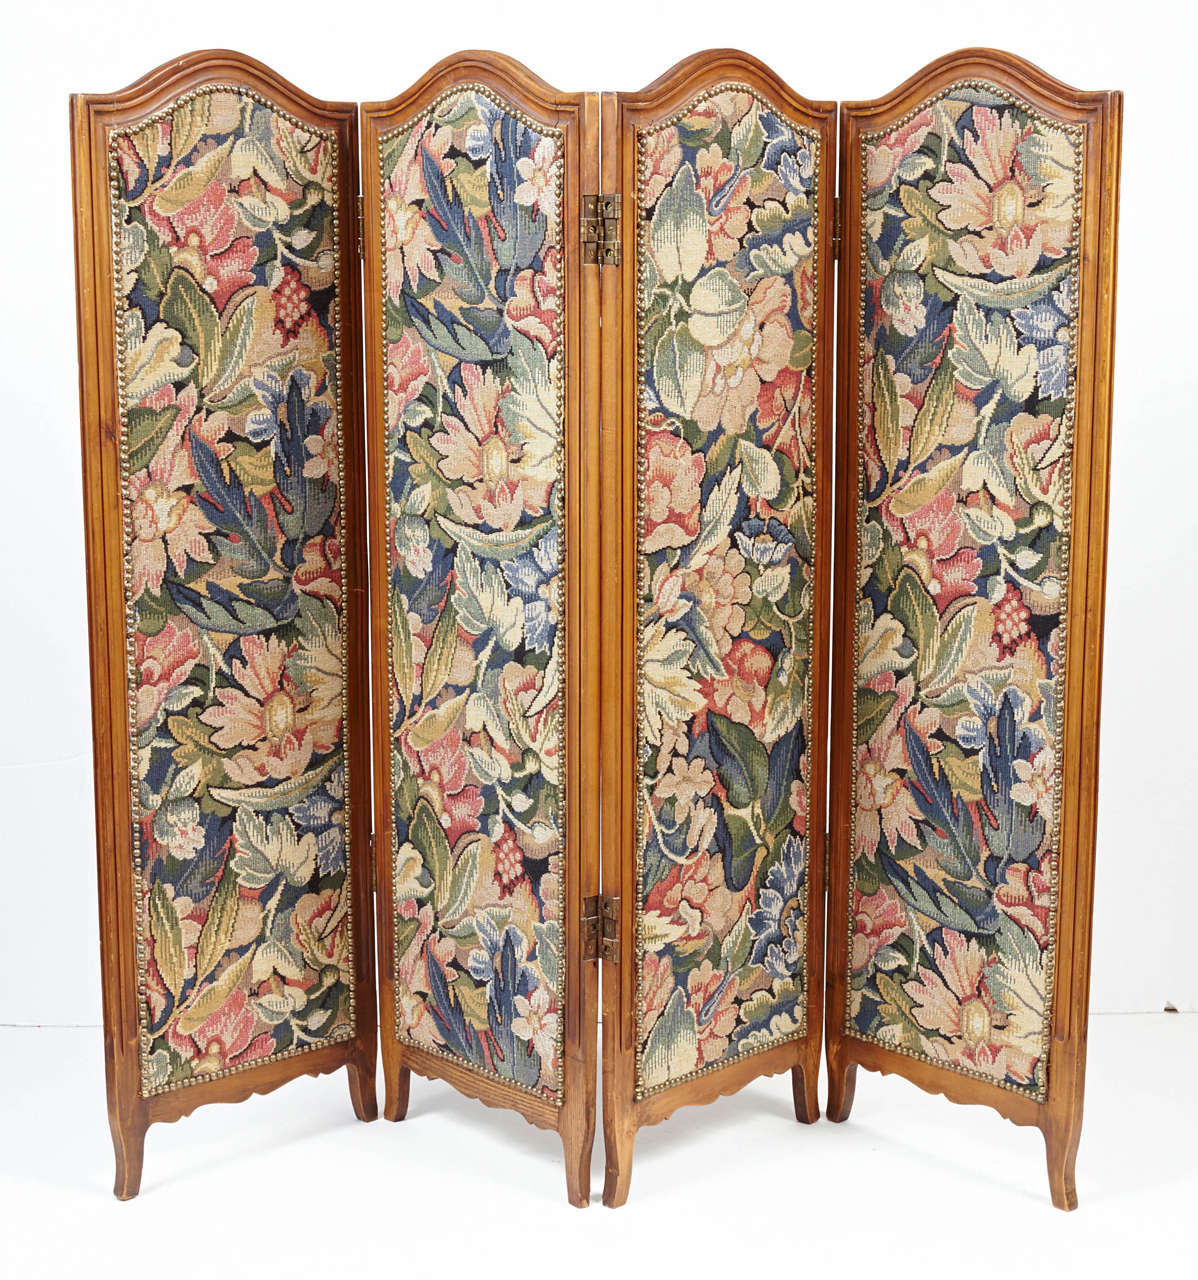 Small Provincial folding screen with 4 arch-top panels with short cabriole legs inset with floral tapestry.